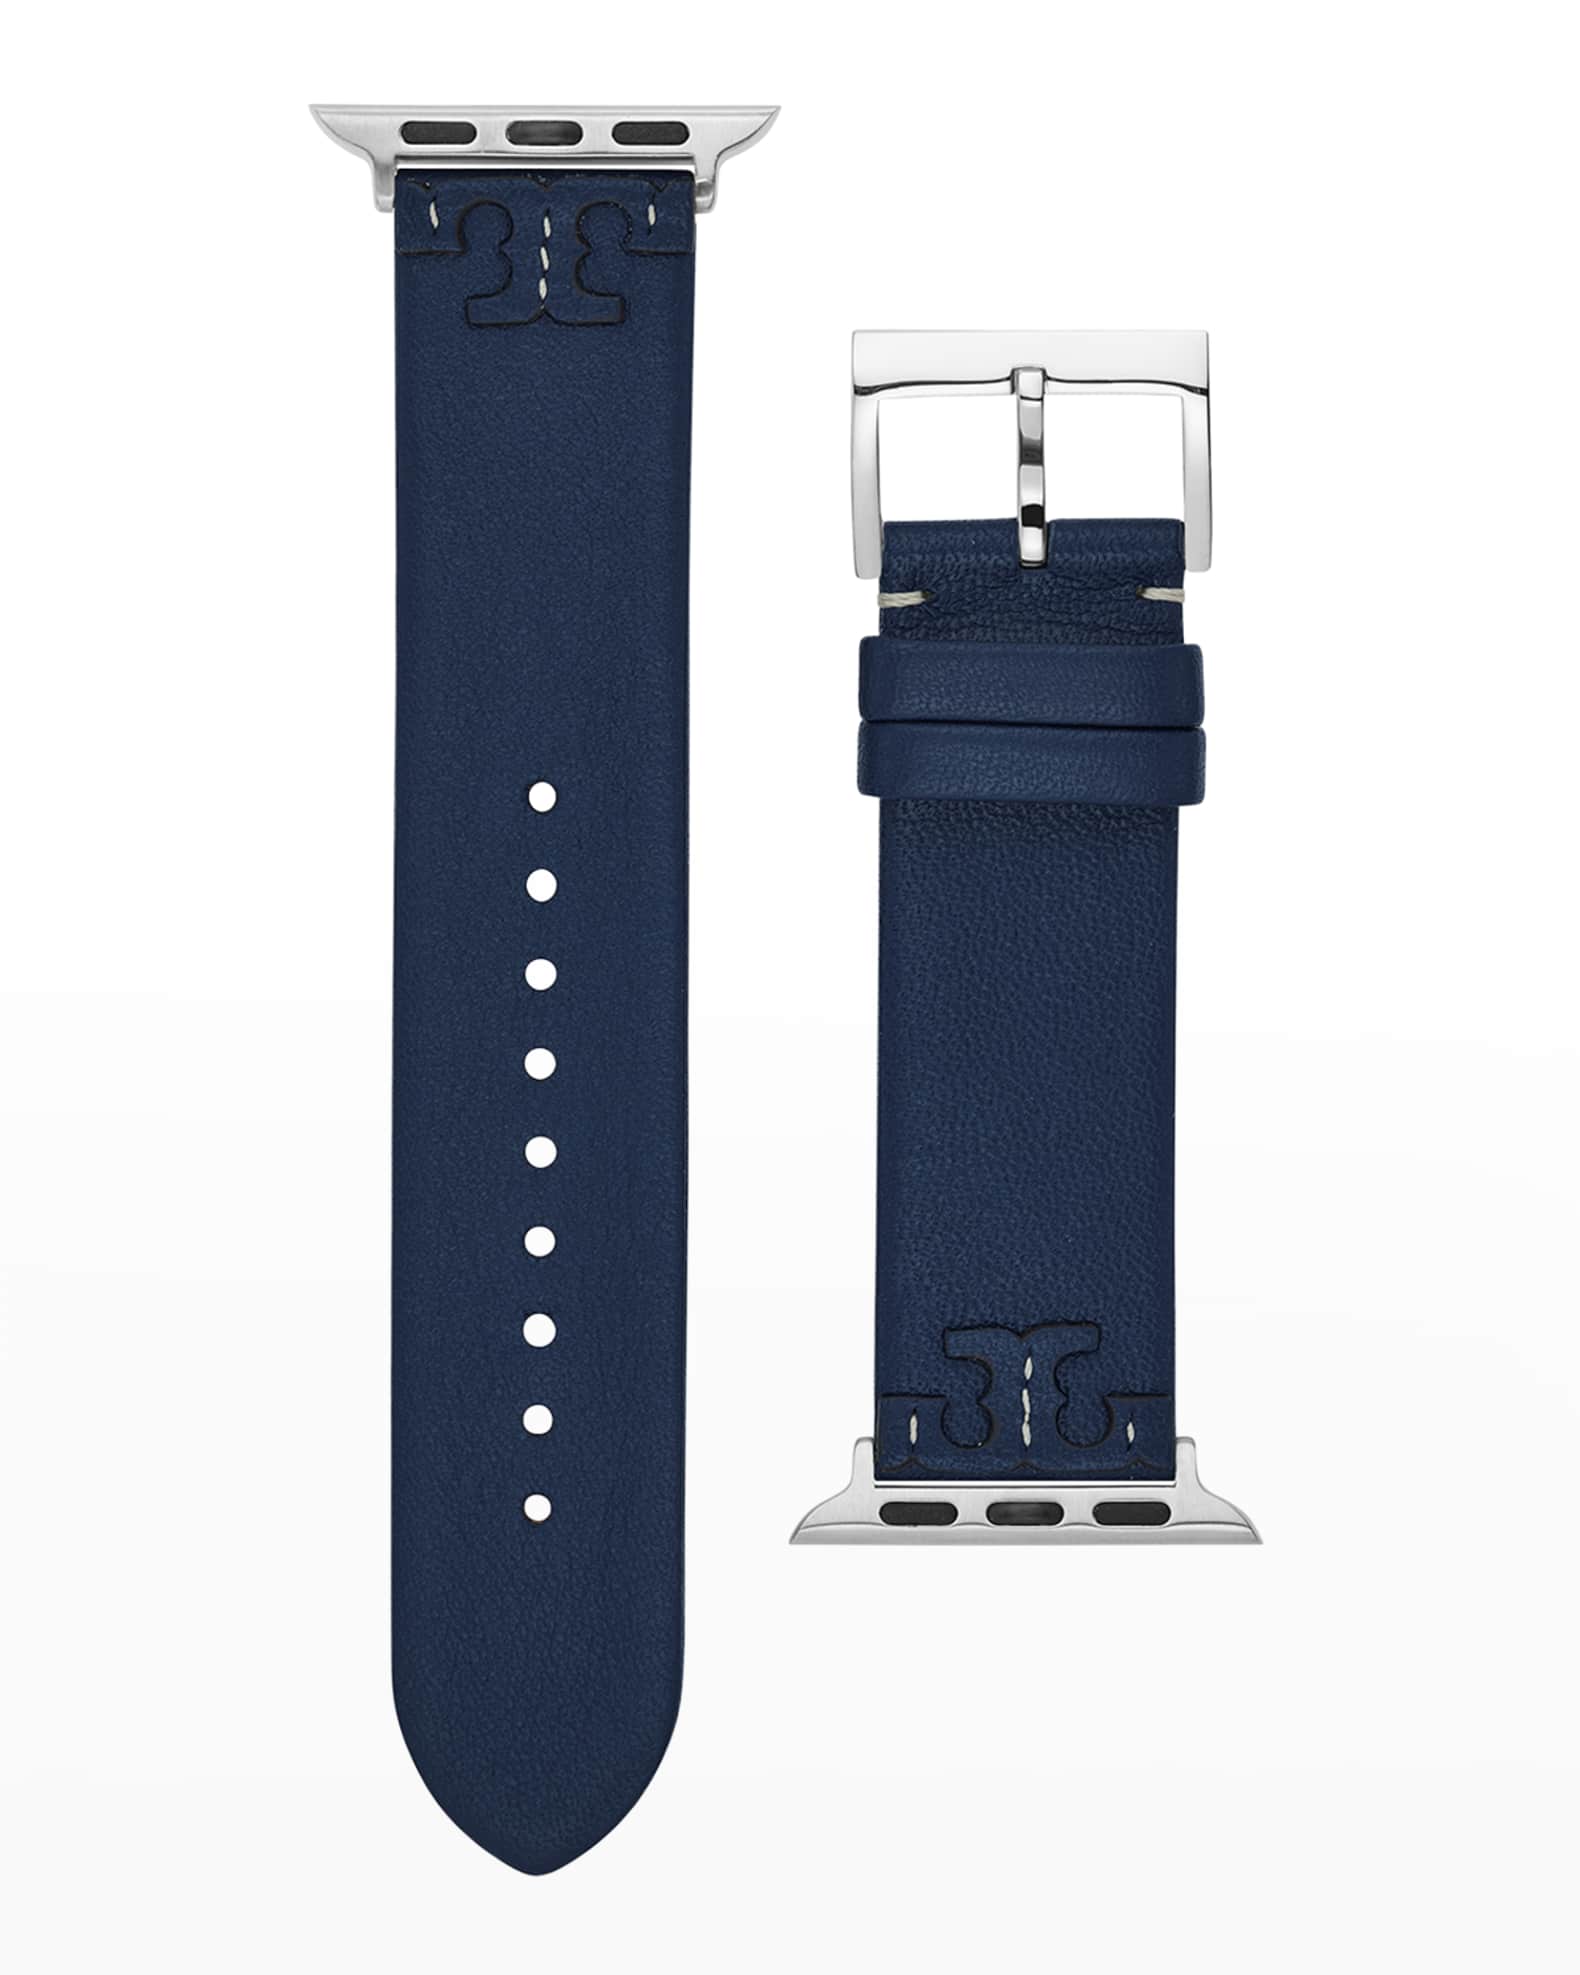 Tory Burch McGraw Leather Apple Watch Band in Navy, 38-40mm | Neiman Marcus